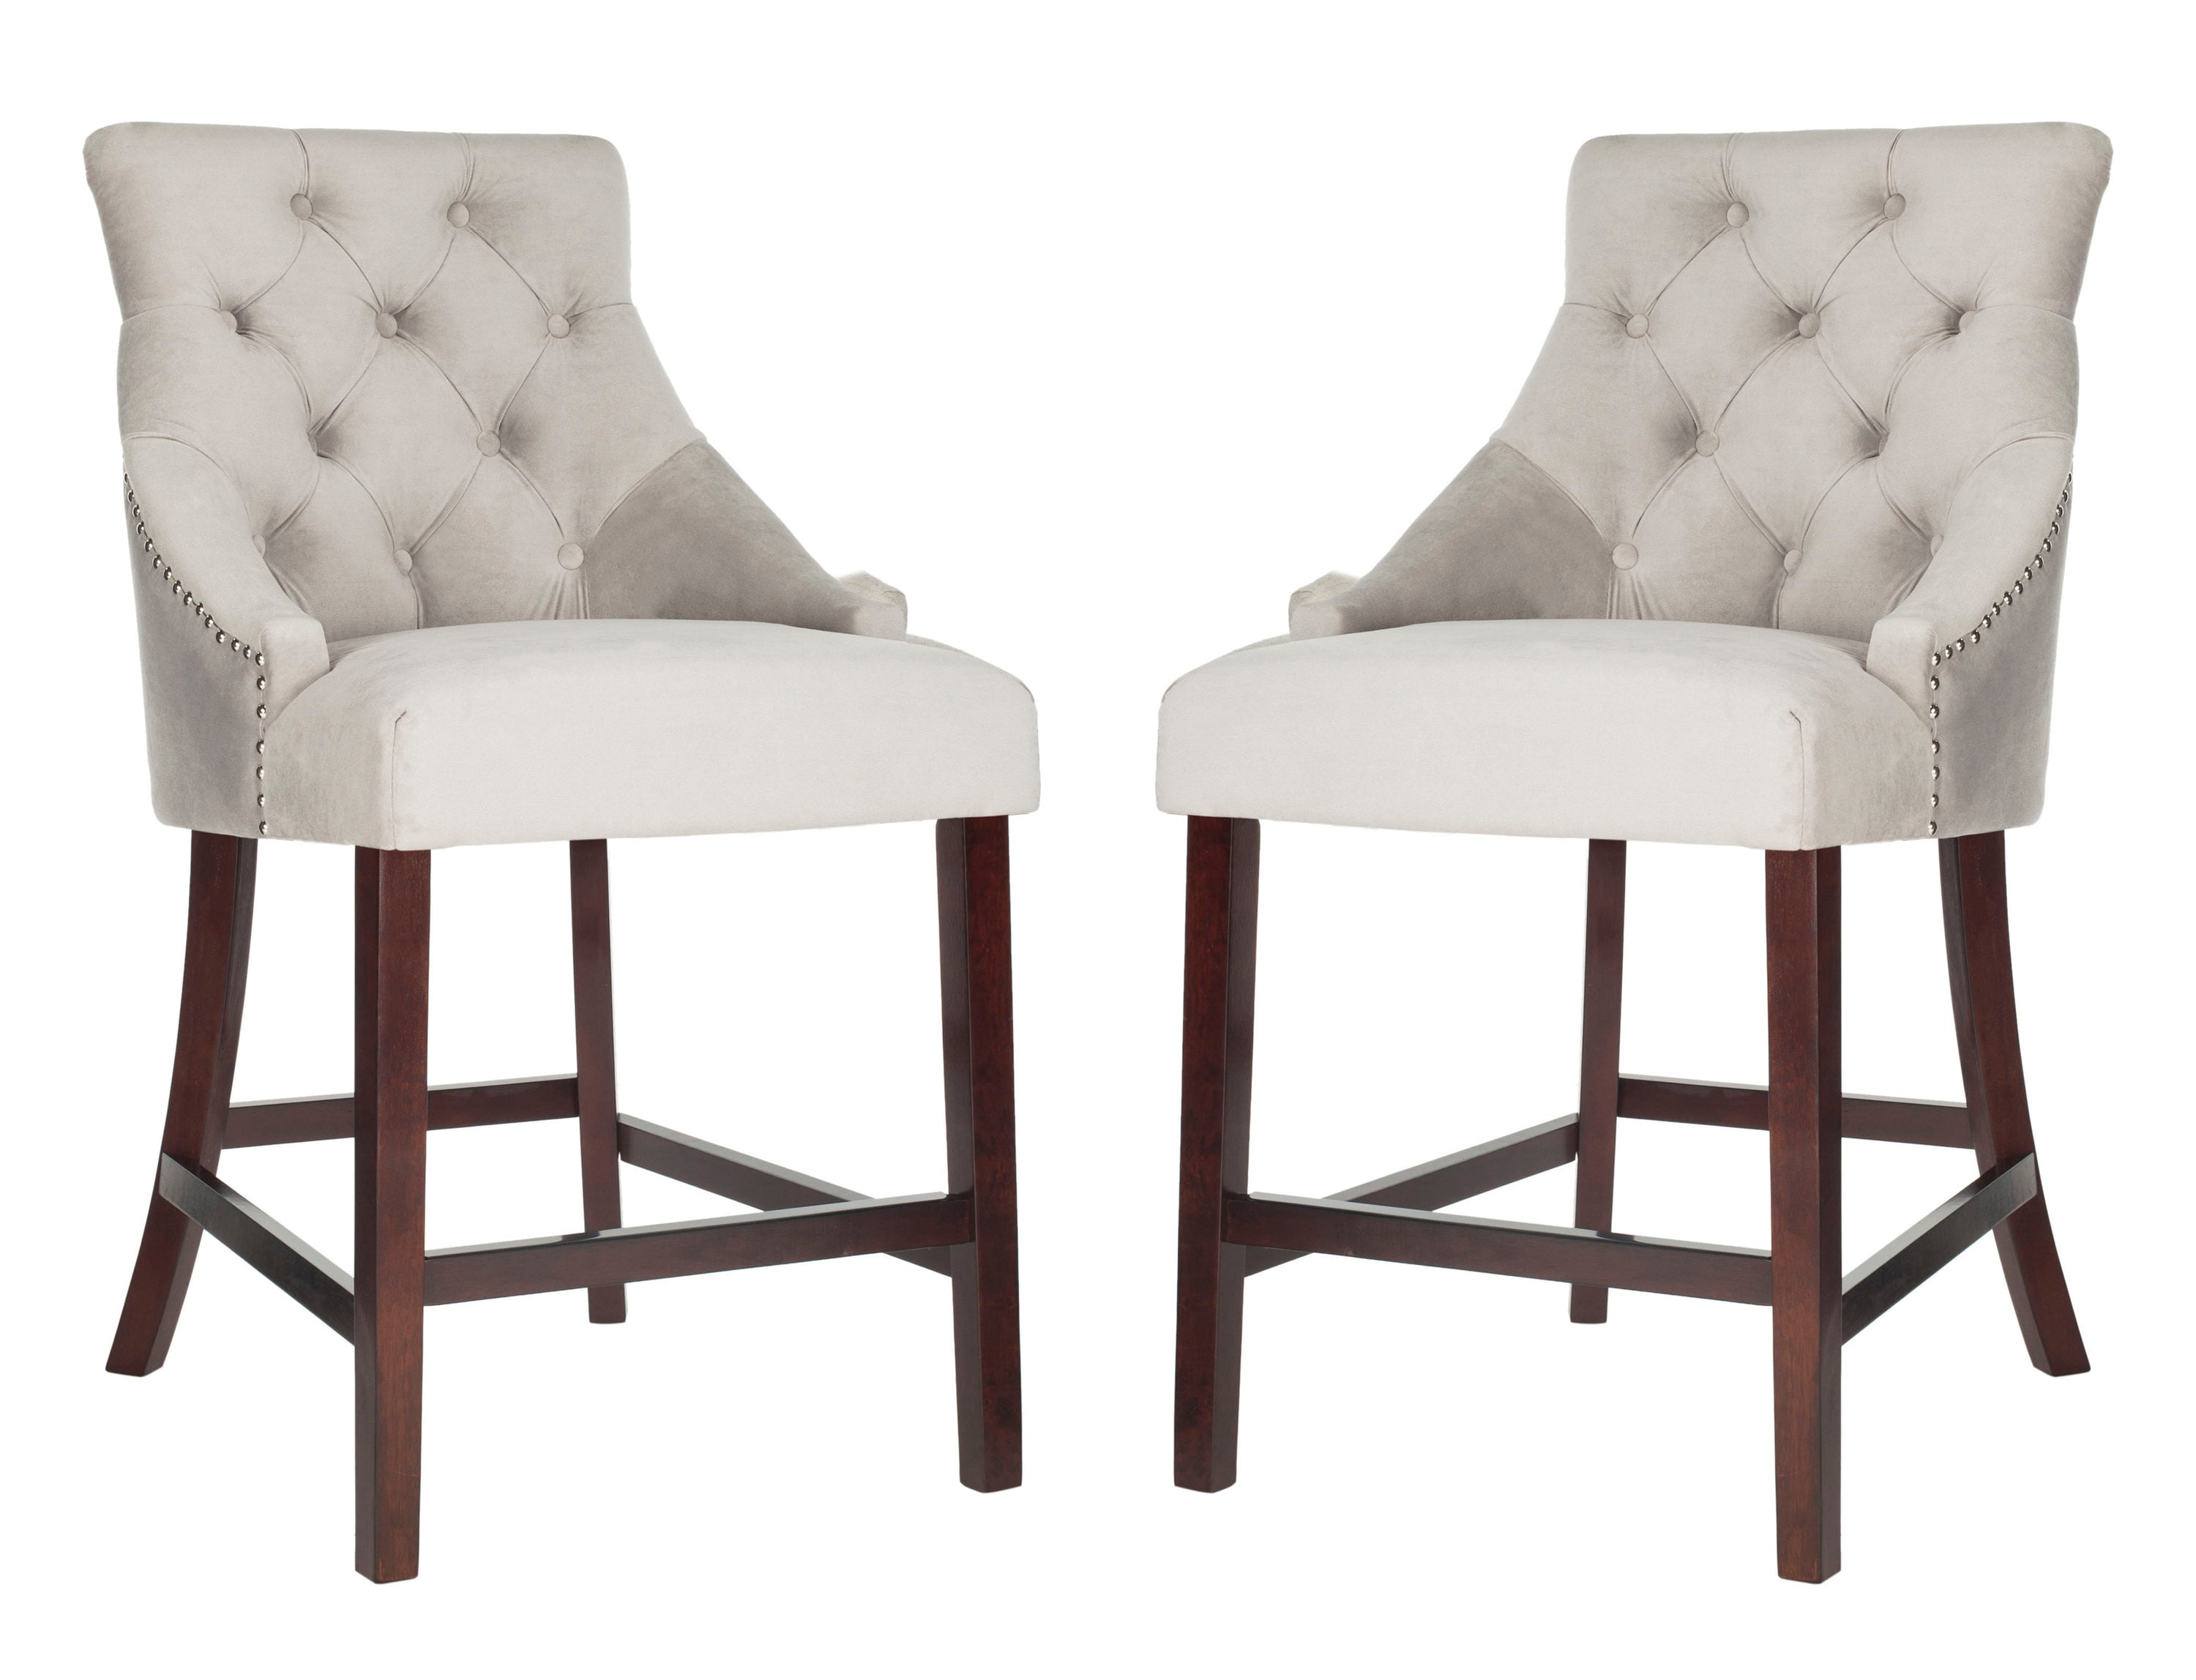 Upholstered Bar Stool In The Stools, Tufted Bar Stools With Arms